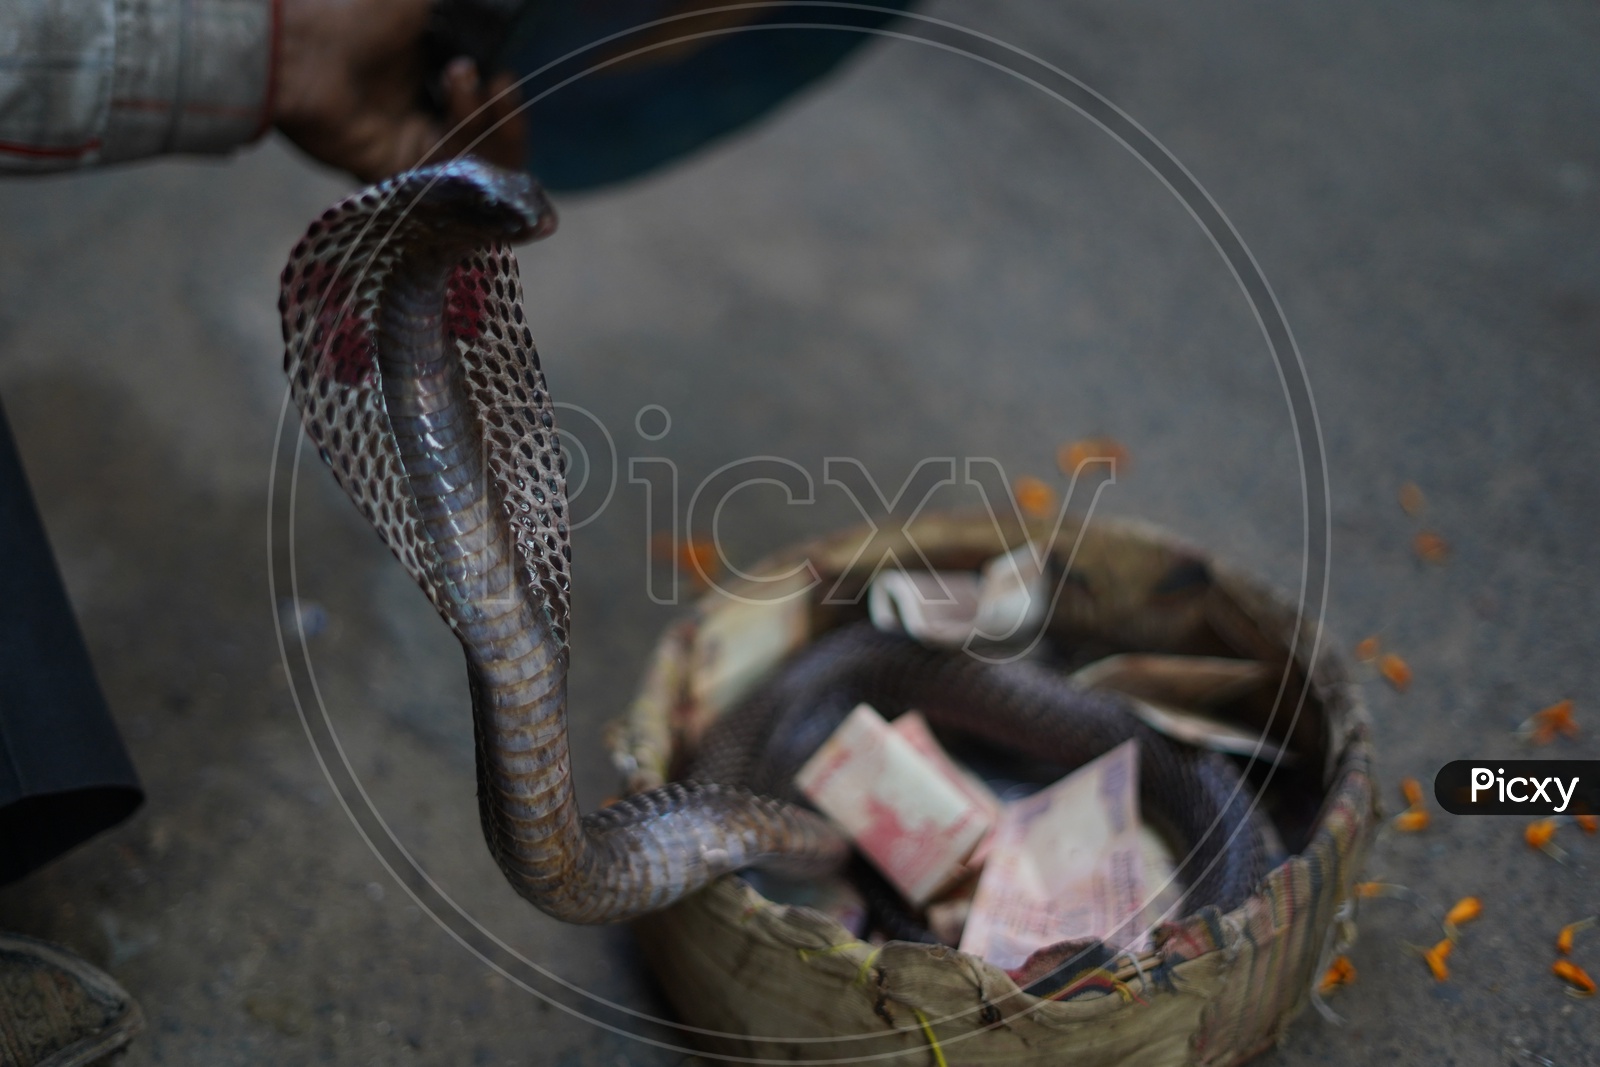 Snake Charmers Making a Play With Cobra Snake in Roads of Pushkar